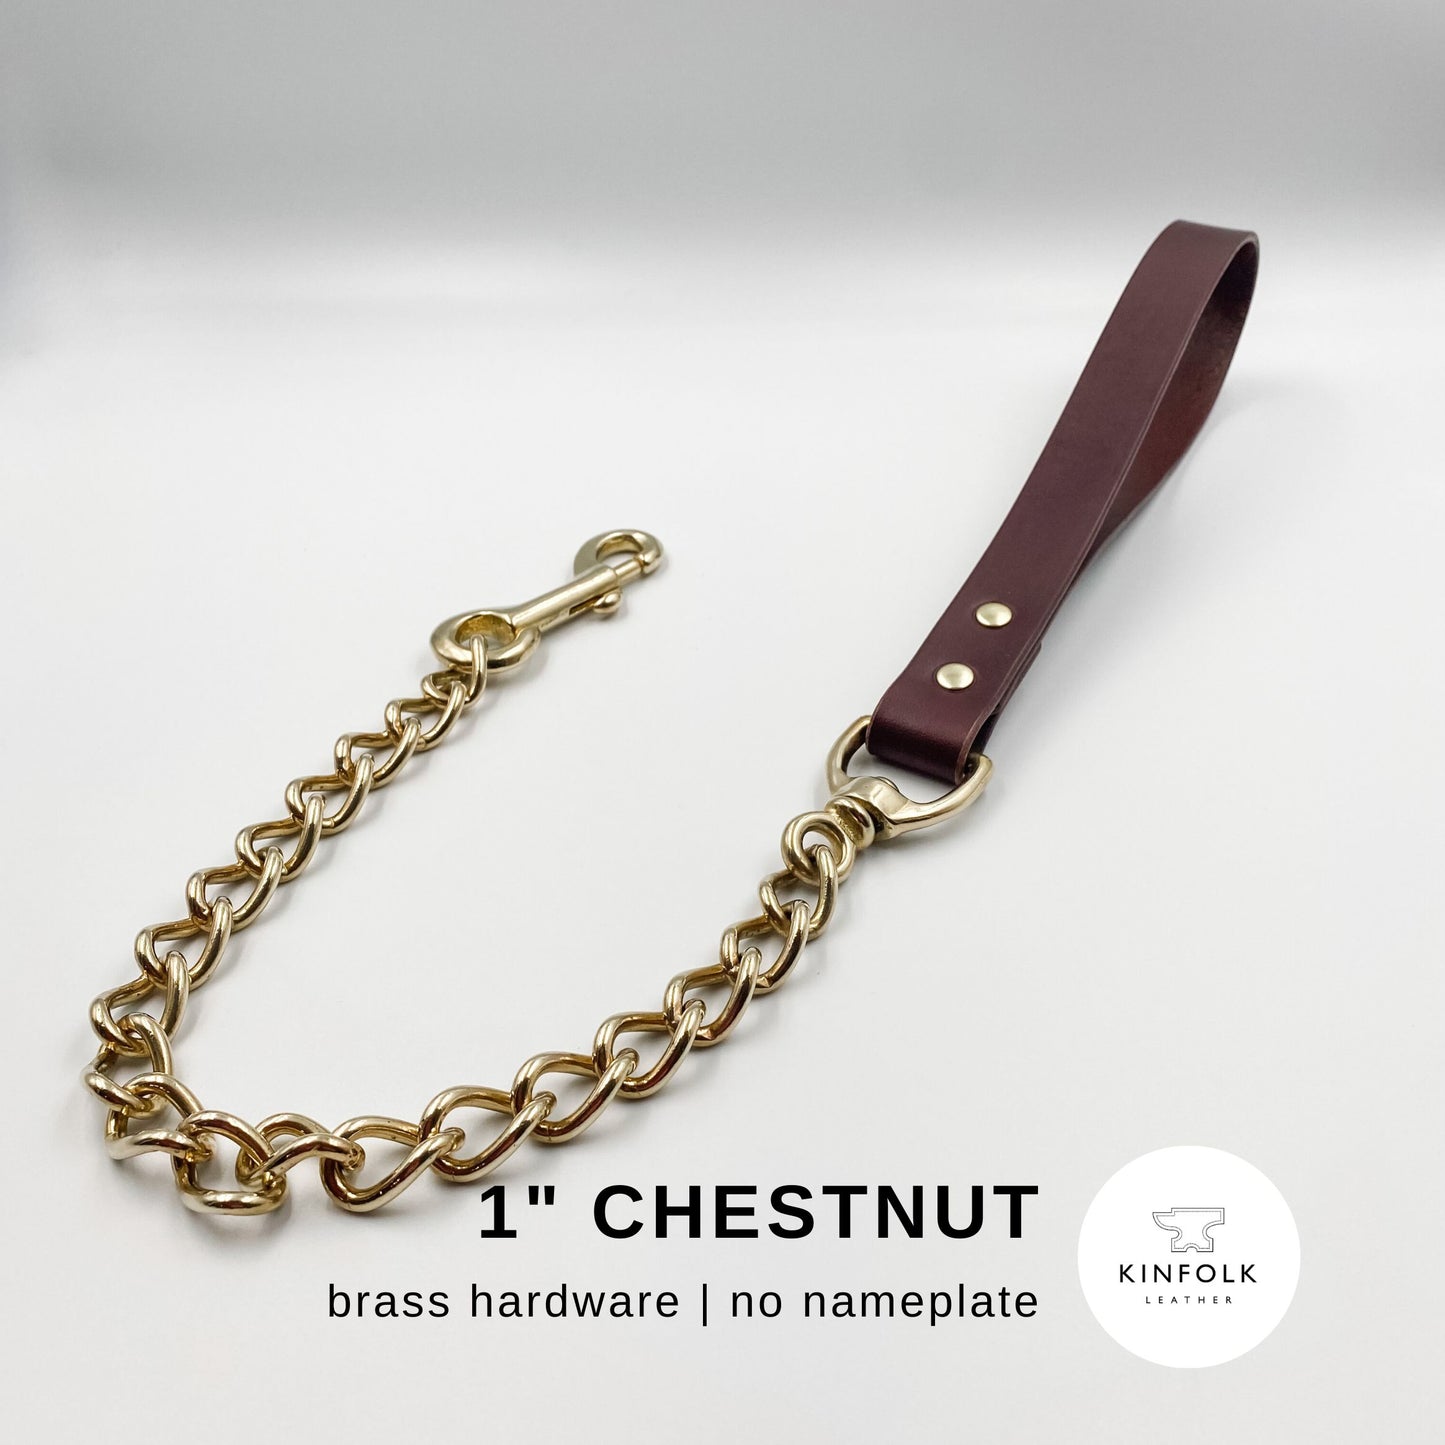 Genuine Leather & Brass - Chain Dog Lead with Leather Handle